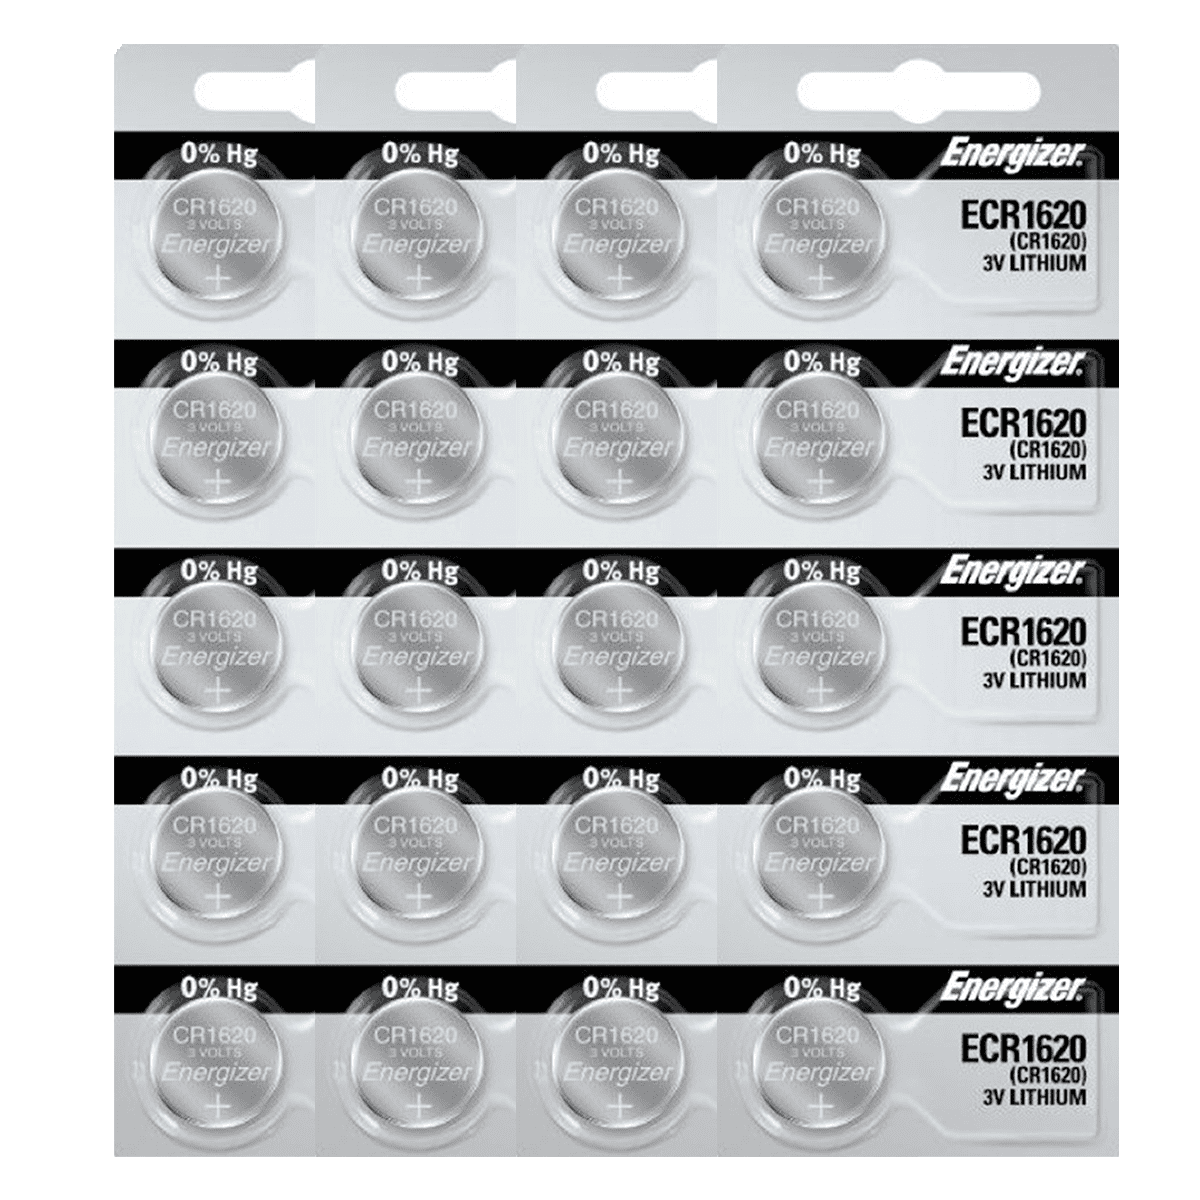 Energizer CR1620 3V Lithium Coin Cell Battery (20 Count)